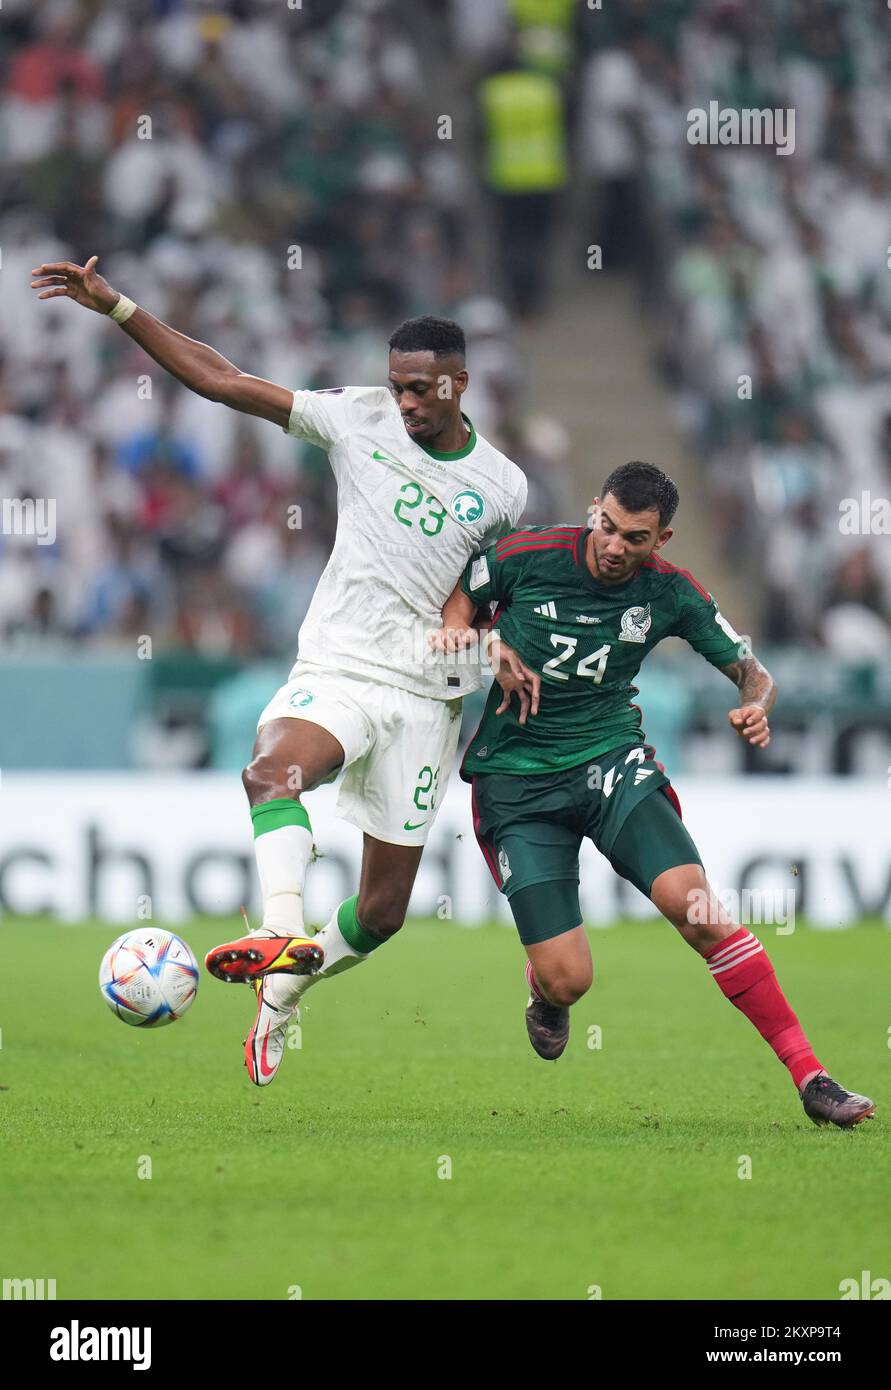 Lusail, Qatar. 30th Nov, 2022. Mohamed Kanno (L) of Saudi Arabia vies with Luis Chavez of Mexico during the Group C match between Saudi Arabia and Mexico at the 2022 FIFA World Cup at Lusail Stadium in Lusail, Qatar, Nov. 30, 2022. Credit: Meng Dingbo/Xinhua/Alamy Live News Stock Photo